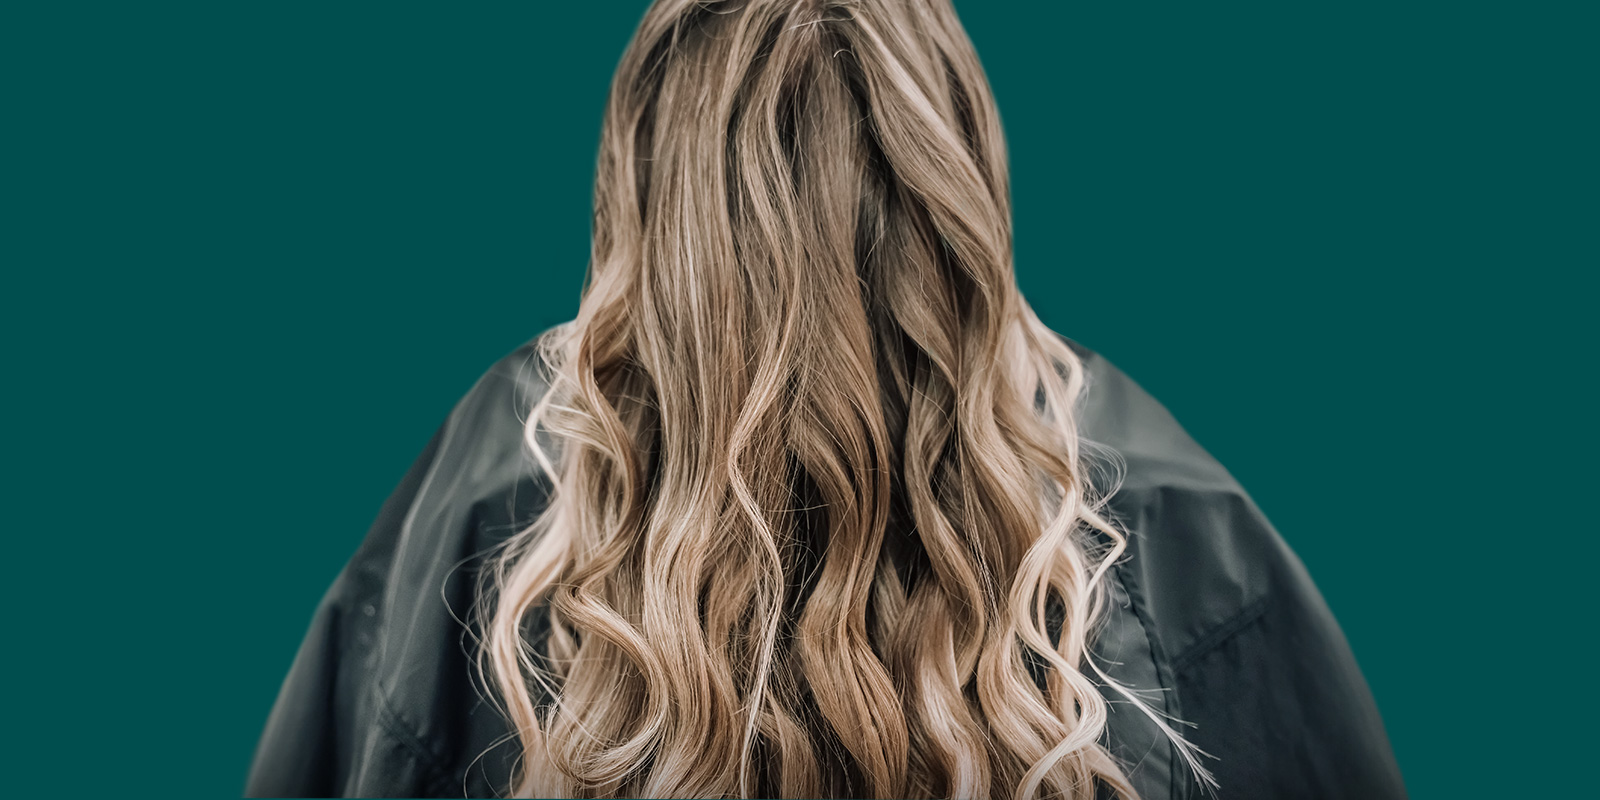 Hair Balayage: Experience Luxury While Caring for Your Hair with Distinctive Style